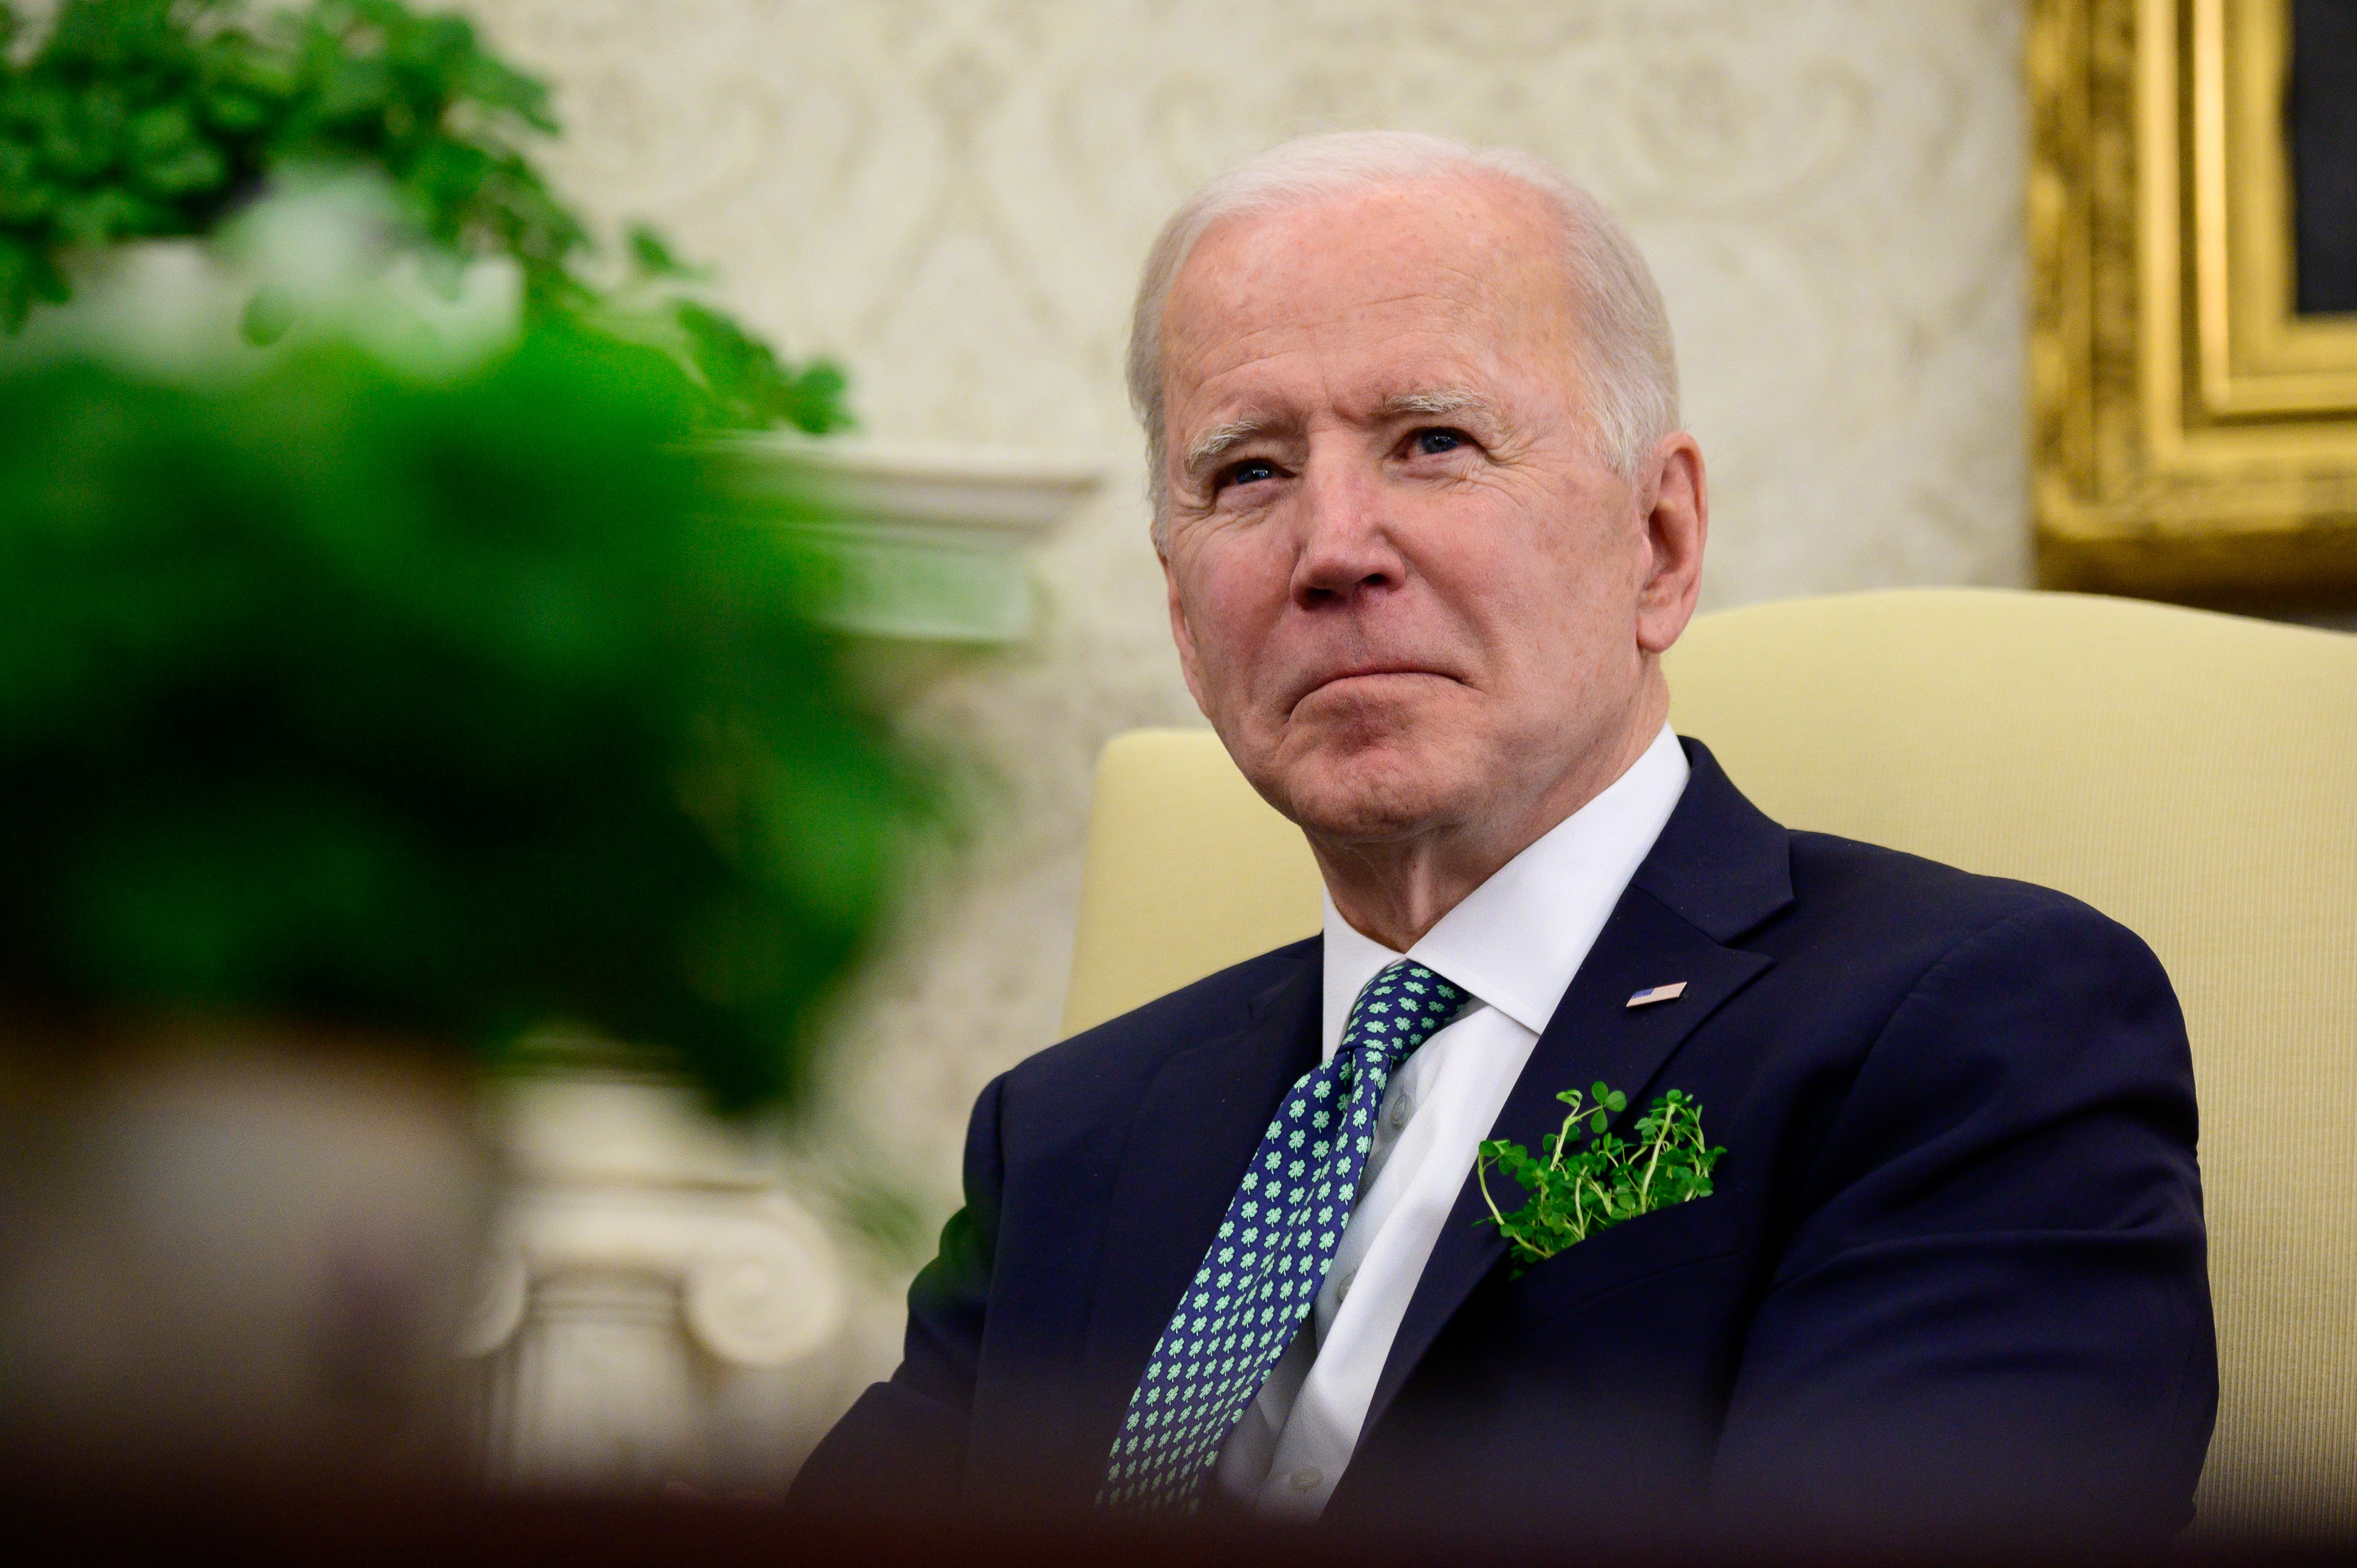 President Biden, pictured last month at the White House, welcoming the Irish prime minister, has spoken of his Irish immigrant ancestors in his new video for naturalised US citizens